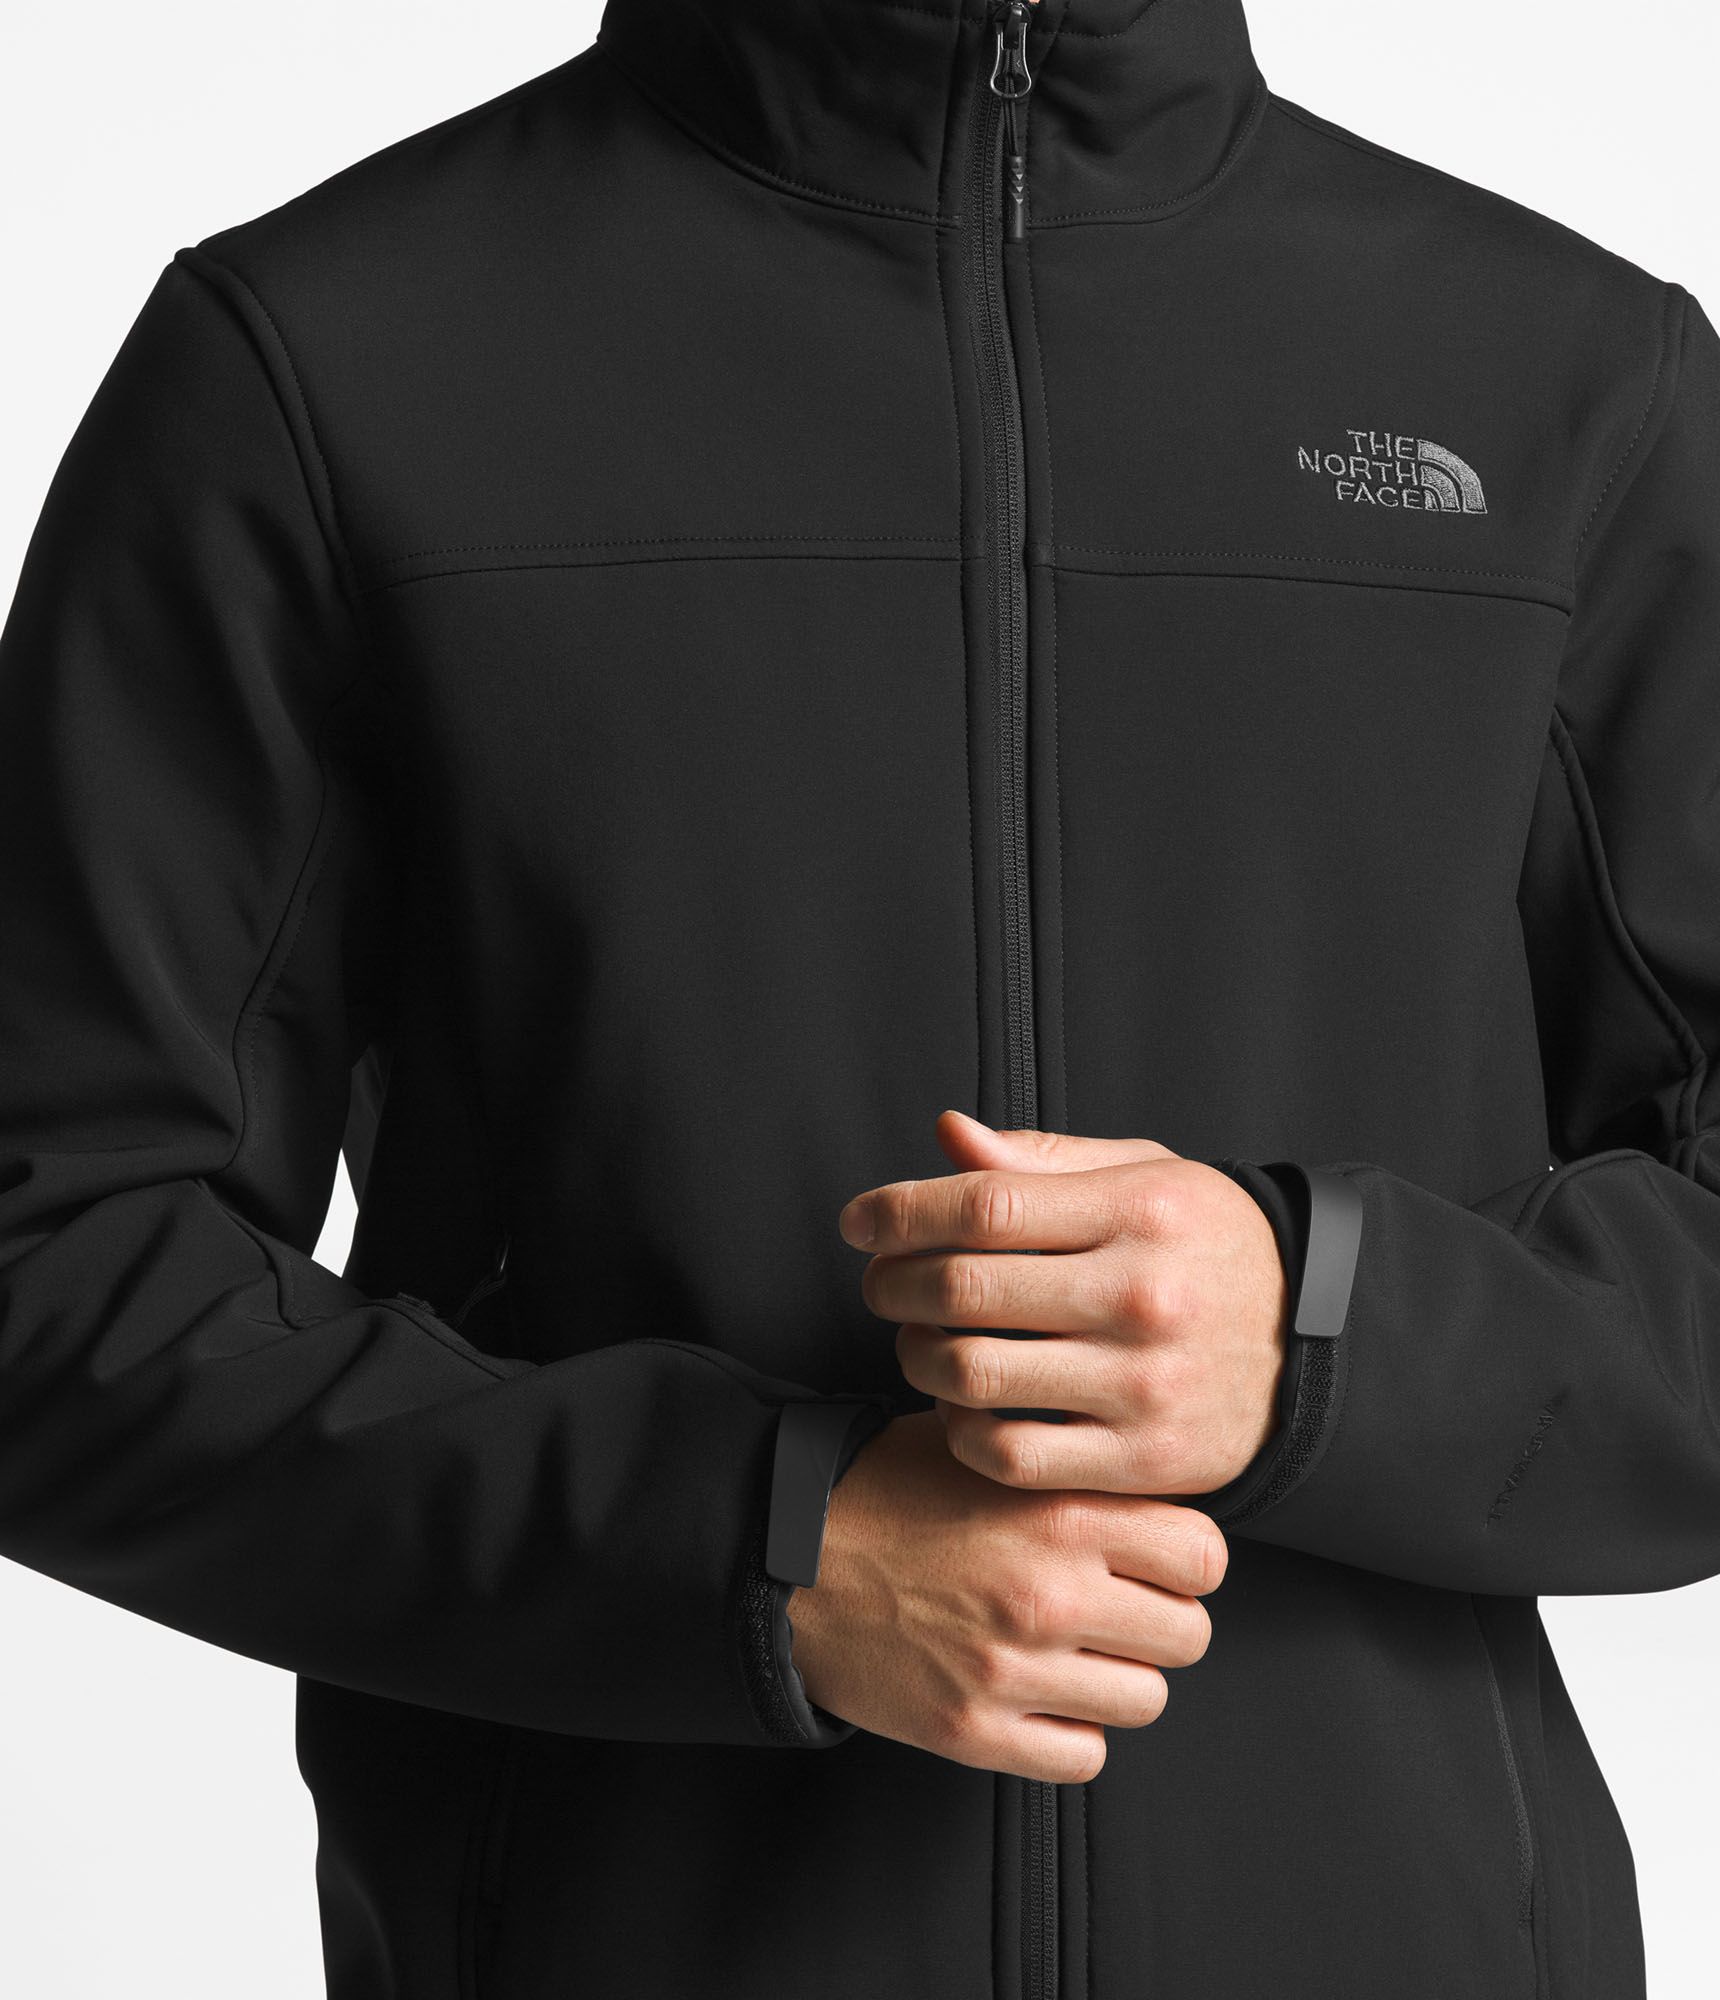 north face men's apex chromium thermal soft shell jacket